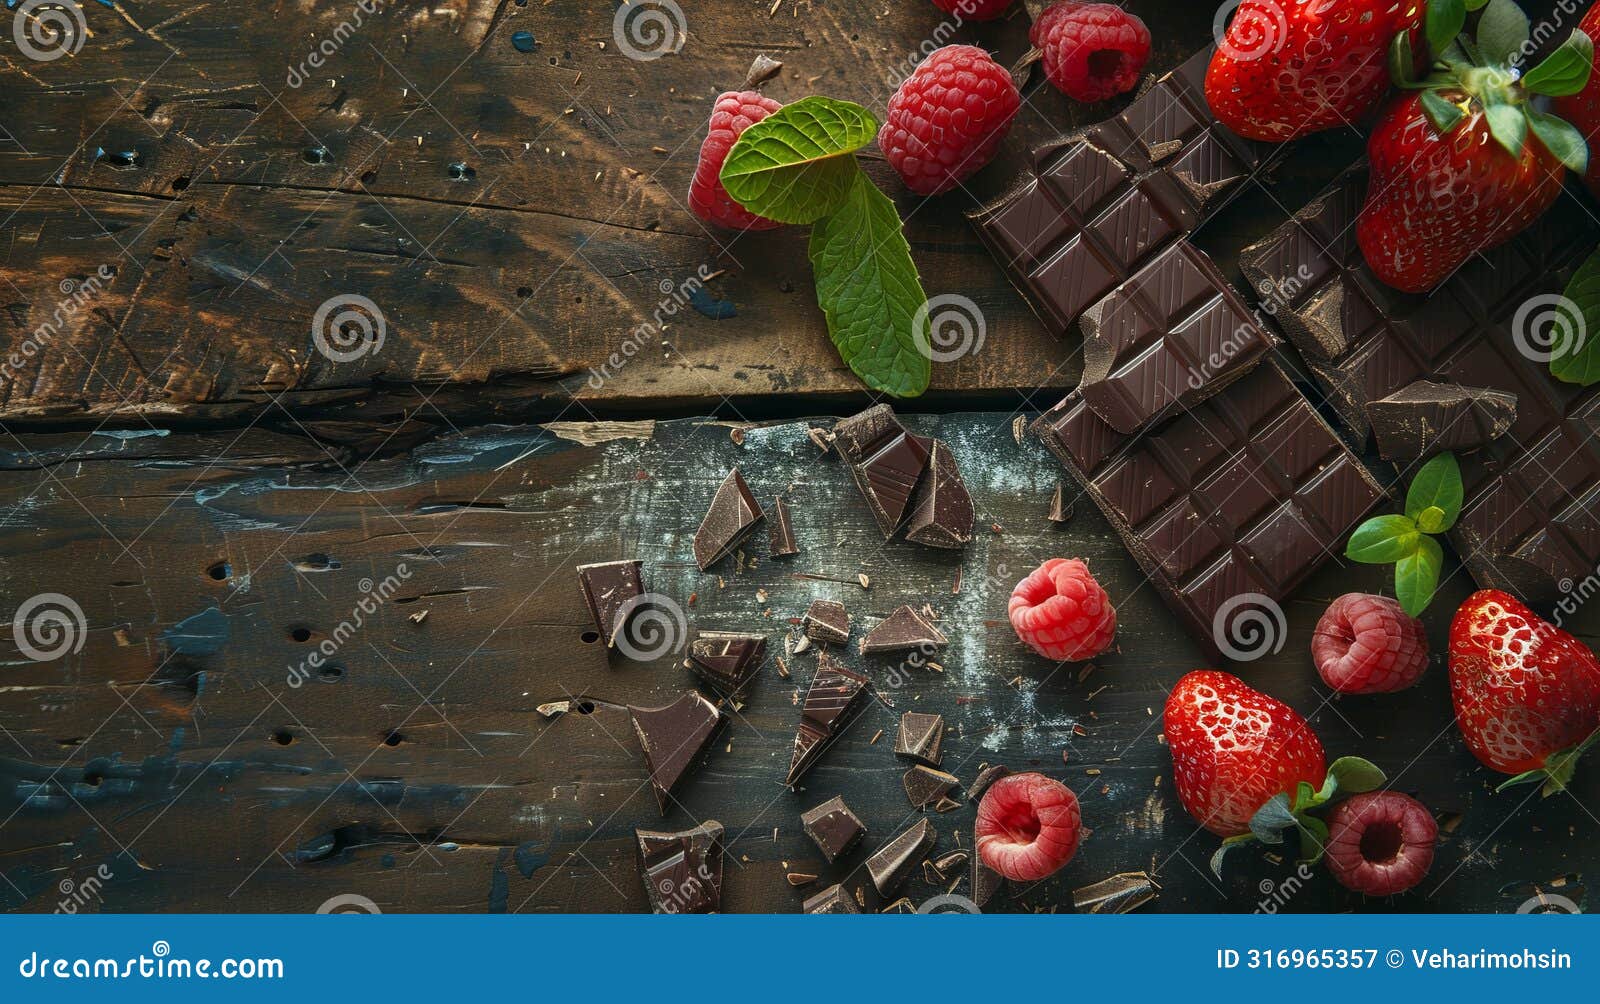 freshness and sweetness on a rustic table food, chocolate, dessert, fruit